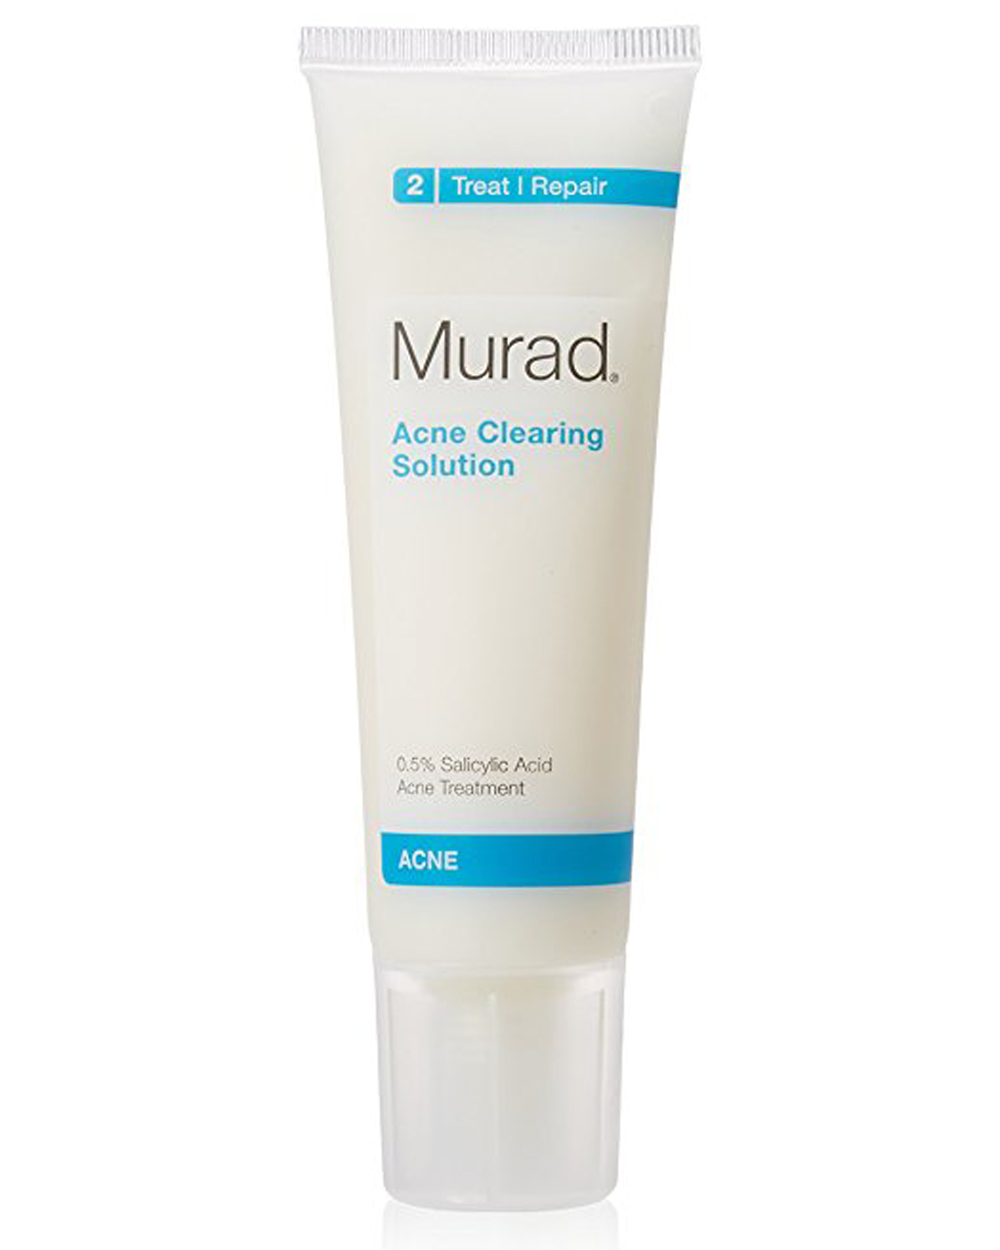 For acne: Murad Acne Clearing Solution